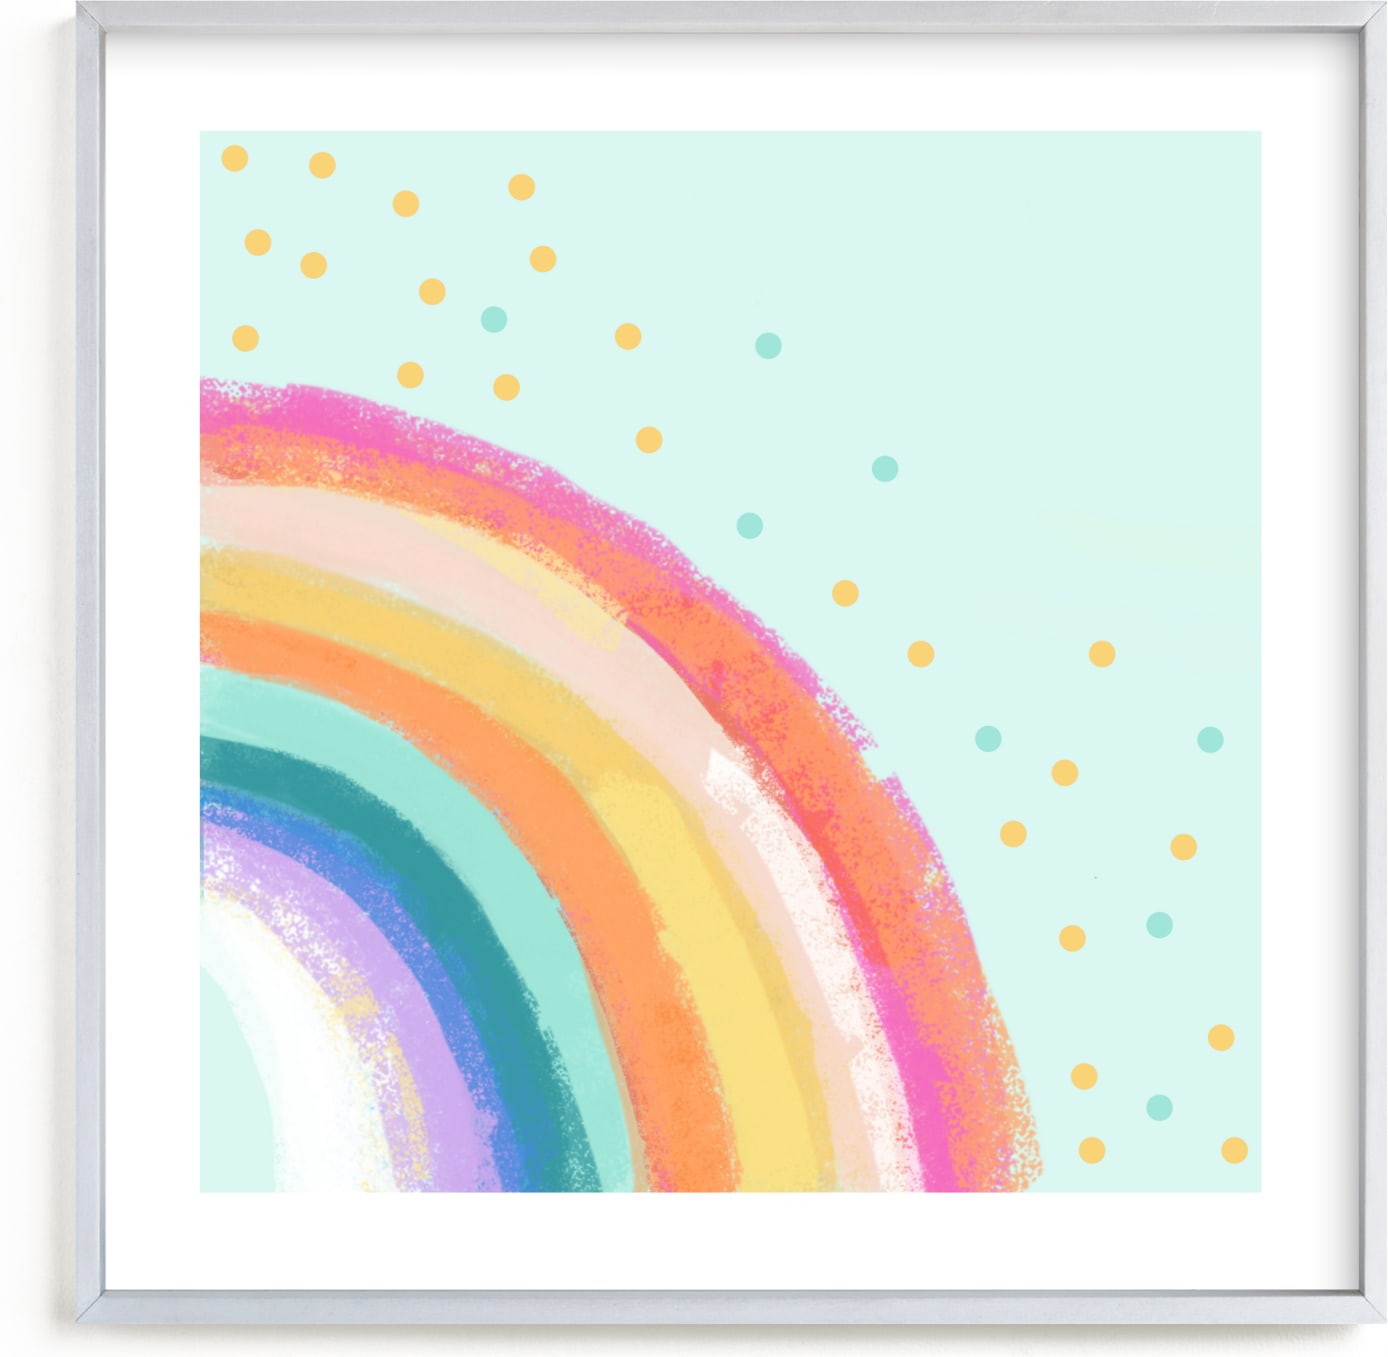 This is a colorful kids wall art by AlisonJerry called Ventura Rainbow l.